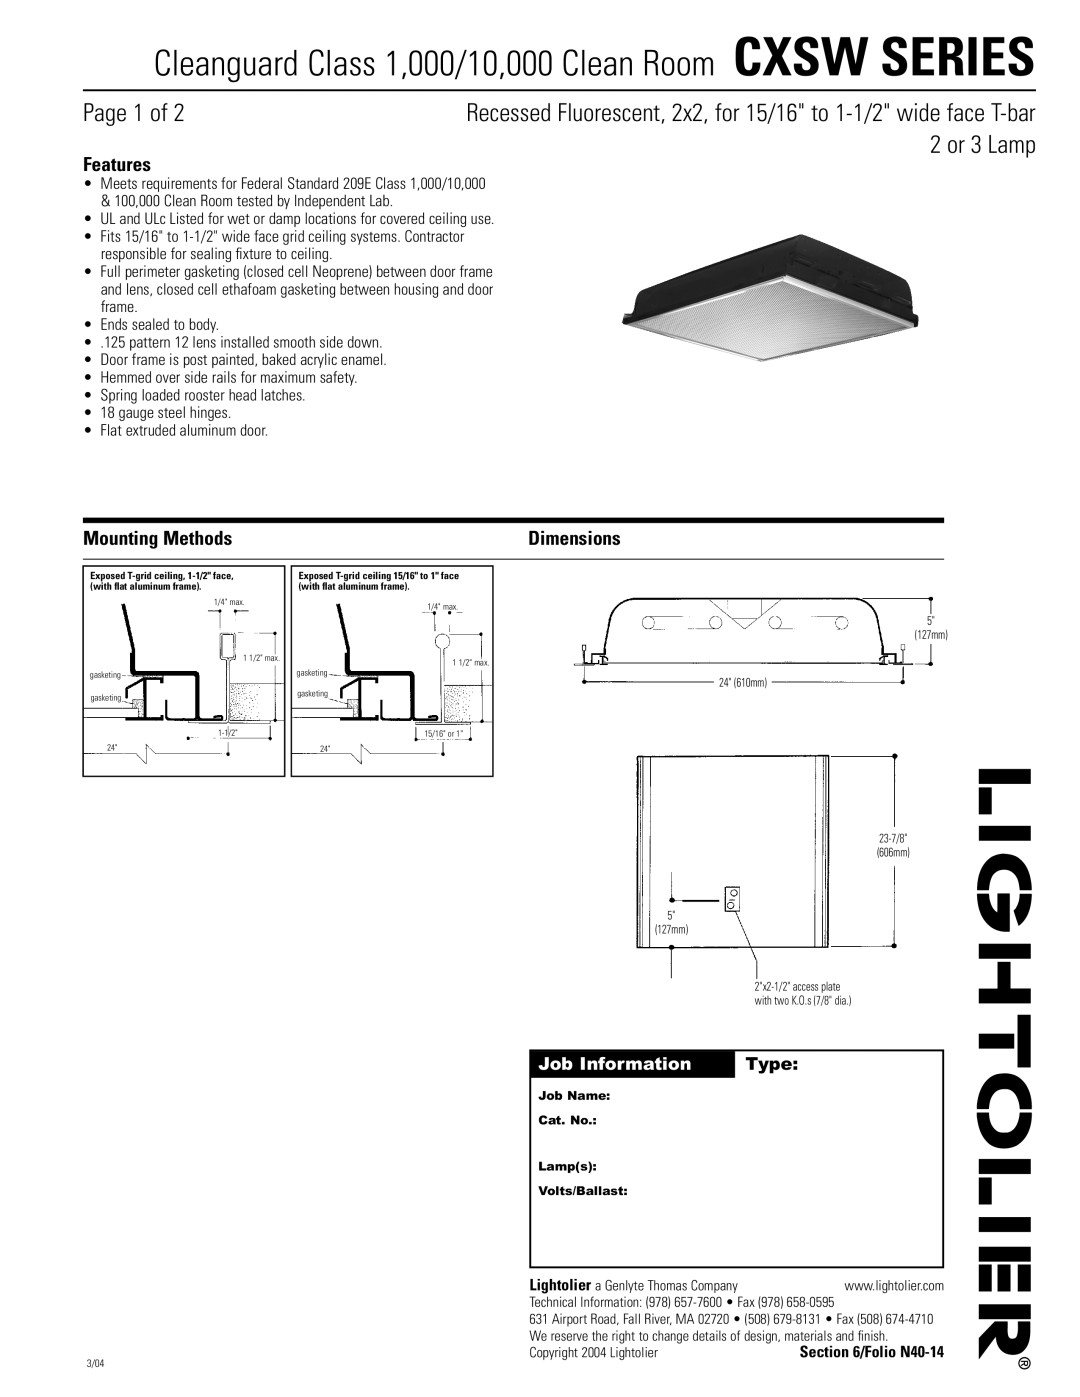 Lightolier CXSW-SERIES2X2 dimensions Page 1 of, 2 or 3 Lamp, Features, Mounting Methods, Job Information, Type, Dimensions 